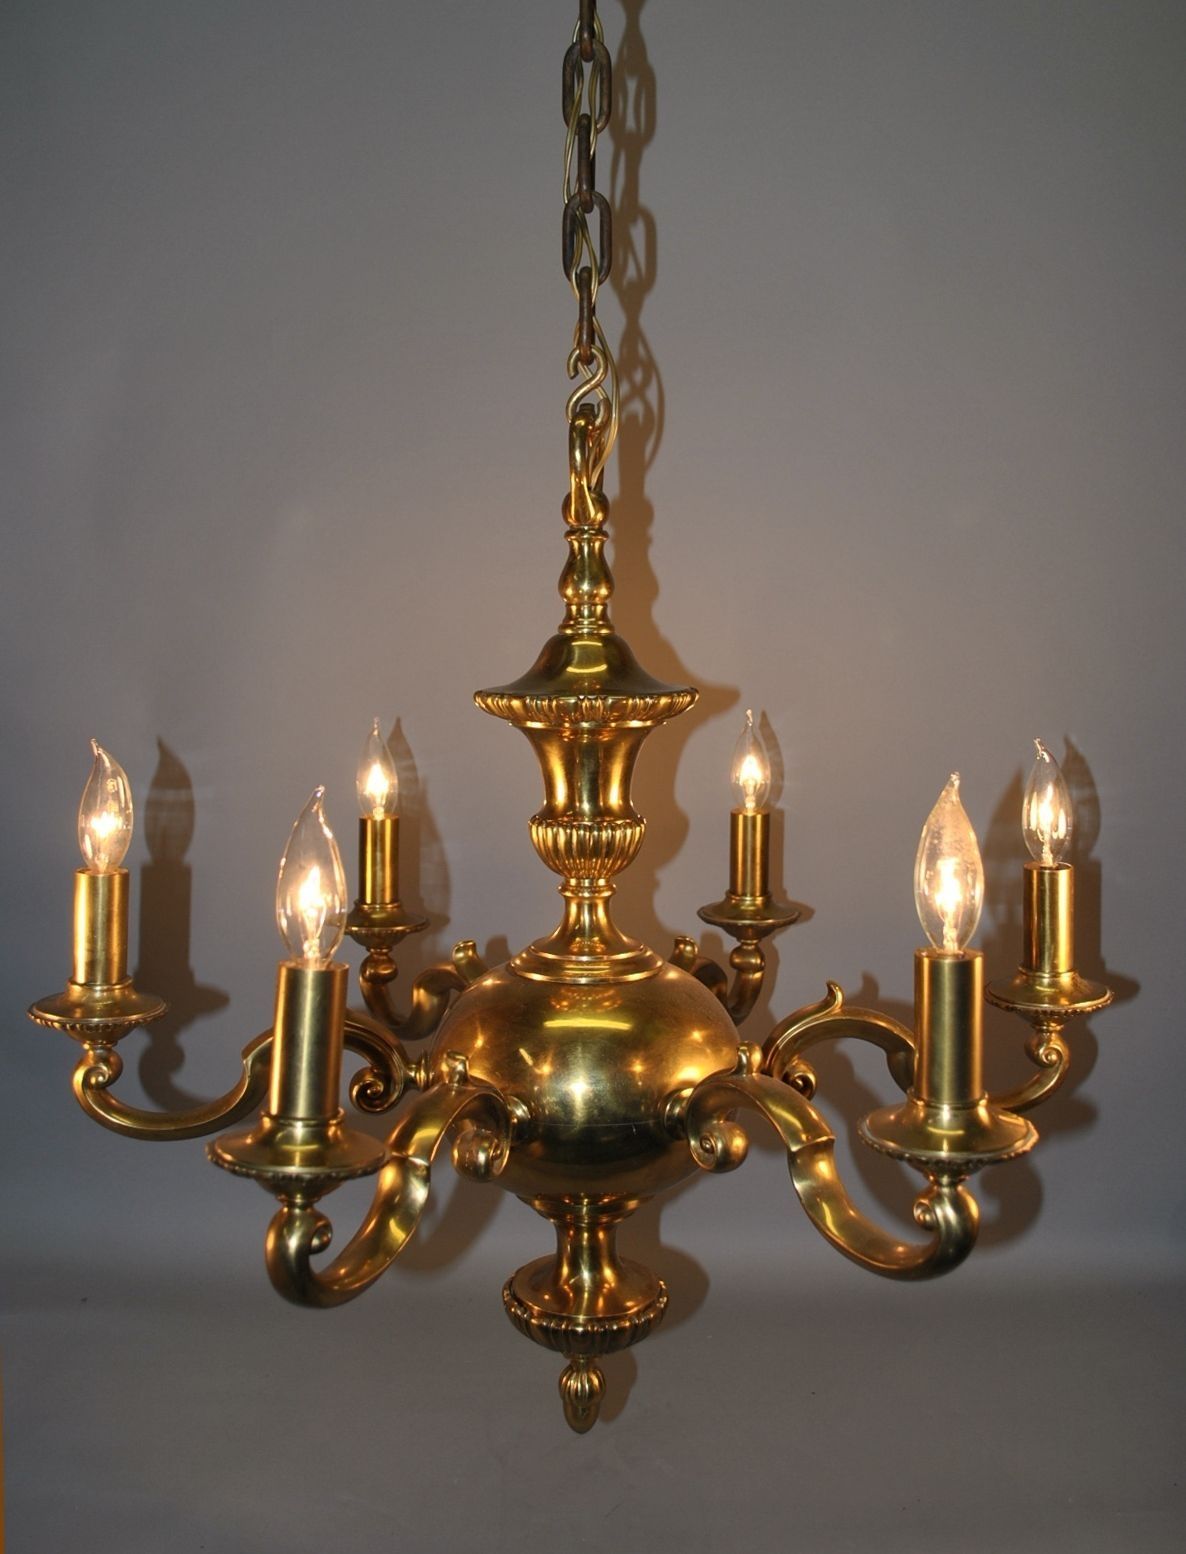 Furniture Vintage And Antique Chandeliers Ideas Vintage With Regard To Old Brass Chandeliers (View 8 of 25)